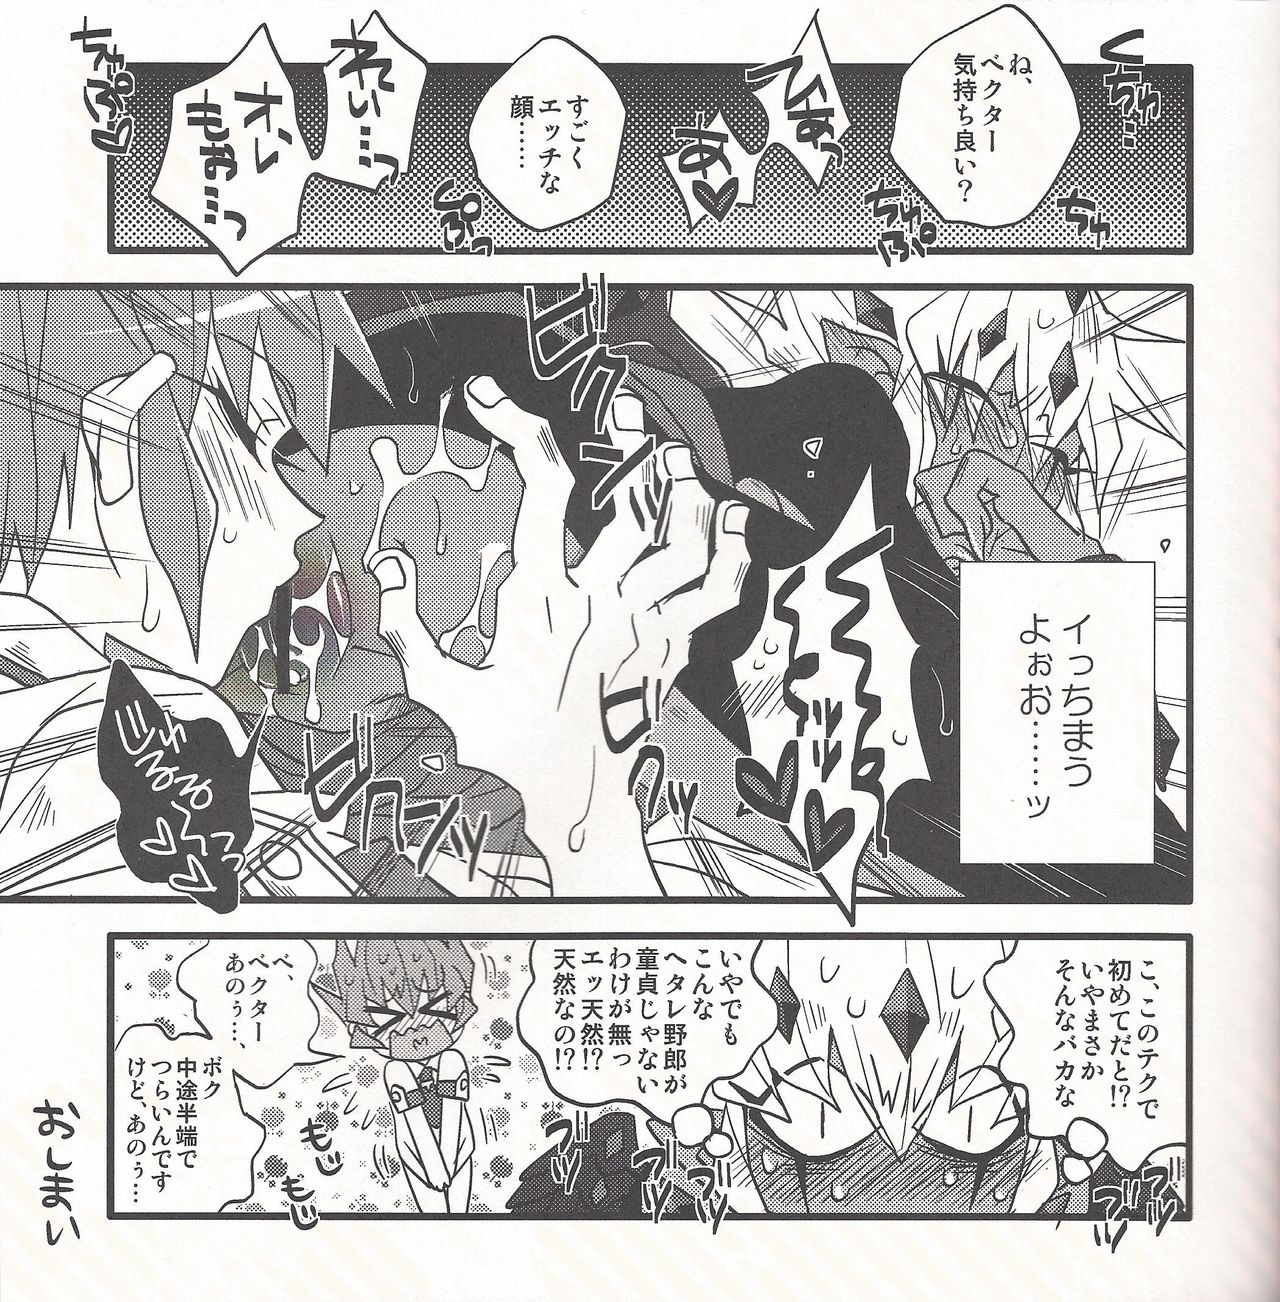 (DUEL PARTY2) [JINBOW (Chiyo, Hatch, Yosuke)] Pajama Party in the Starry Heaven (Yu-Gi-Oh! Zexal) page 16 full